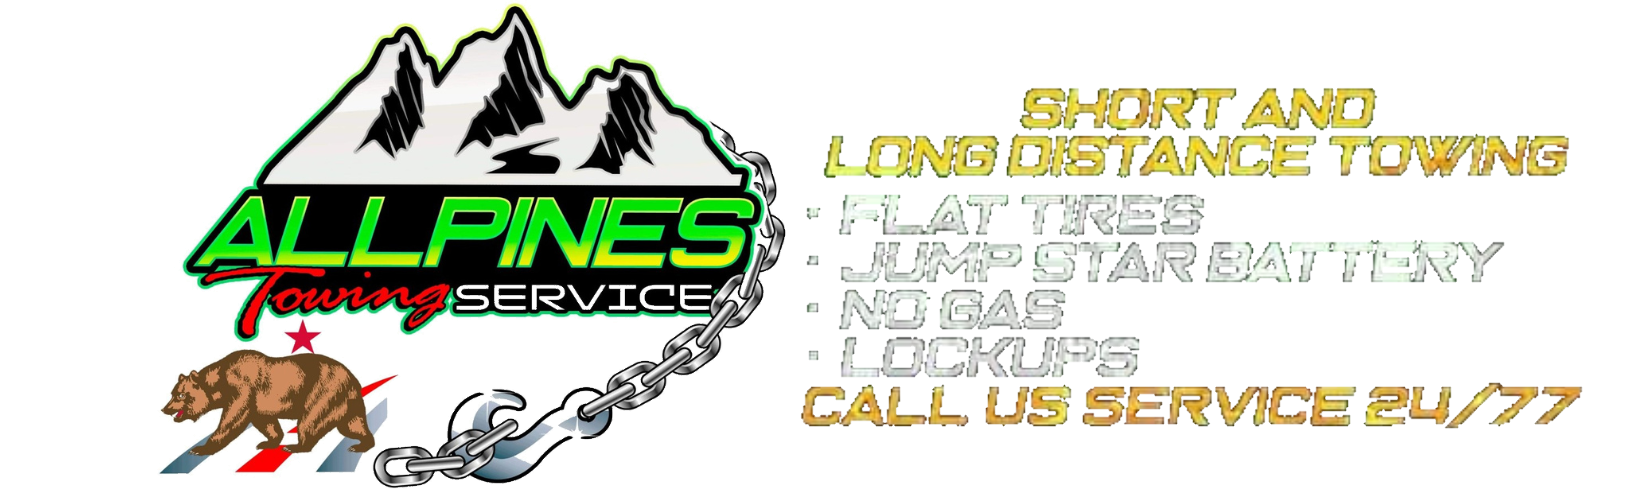 AllPines Towing Service